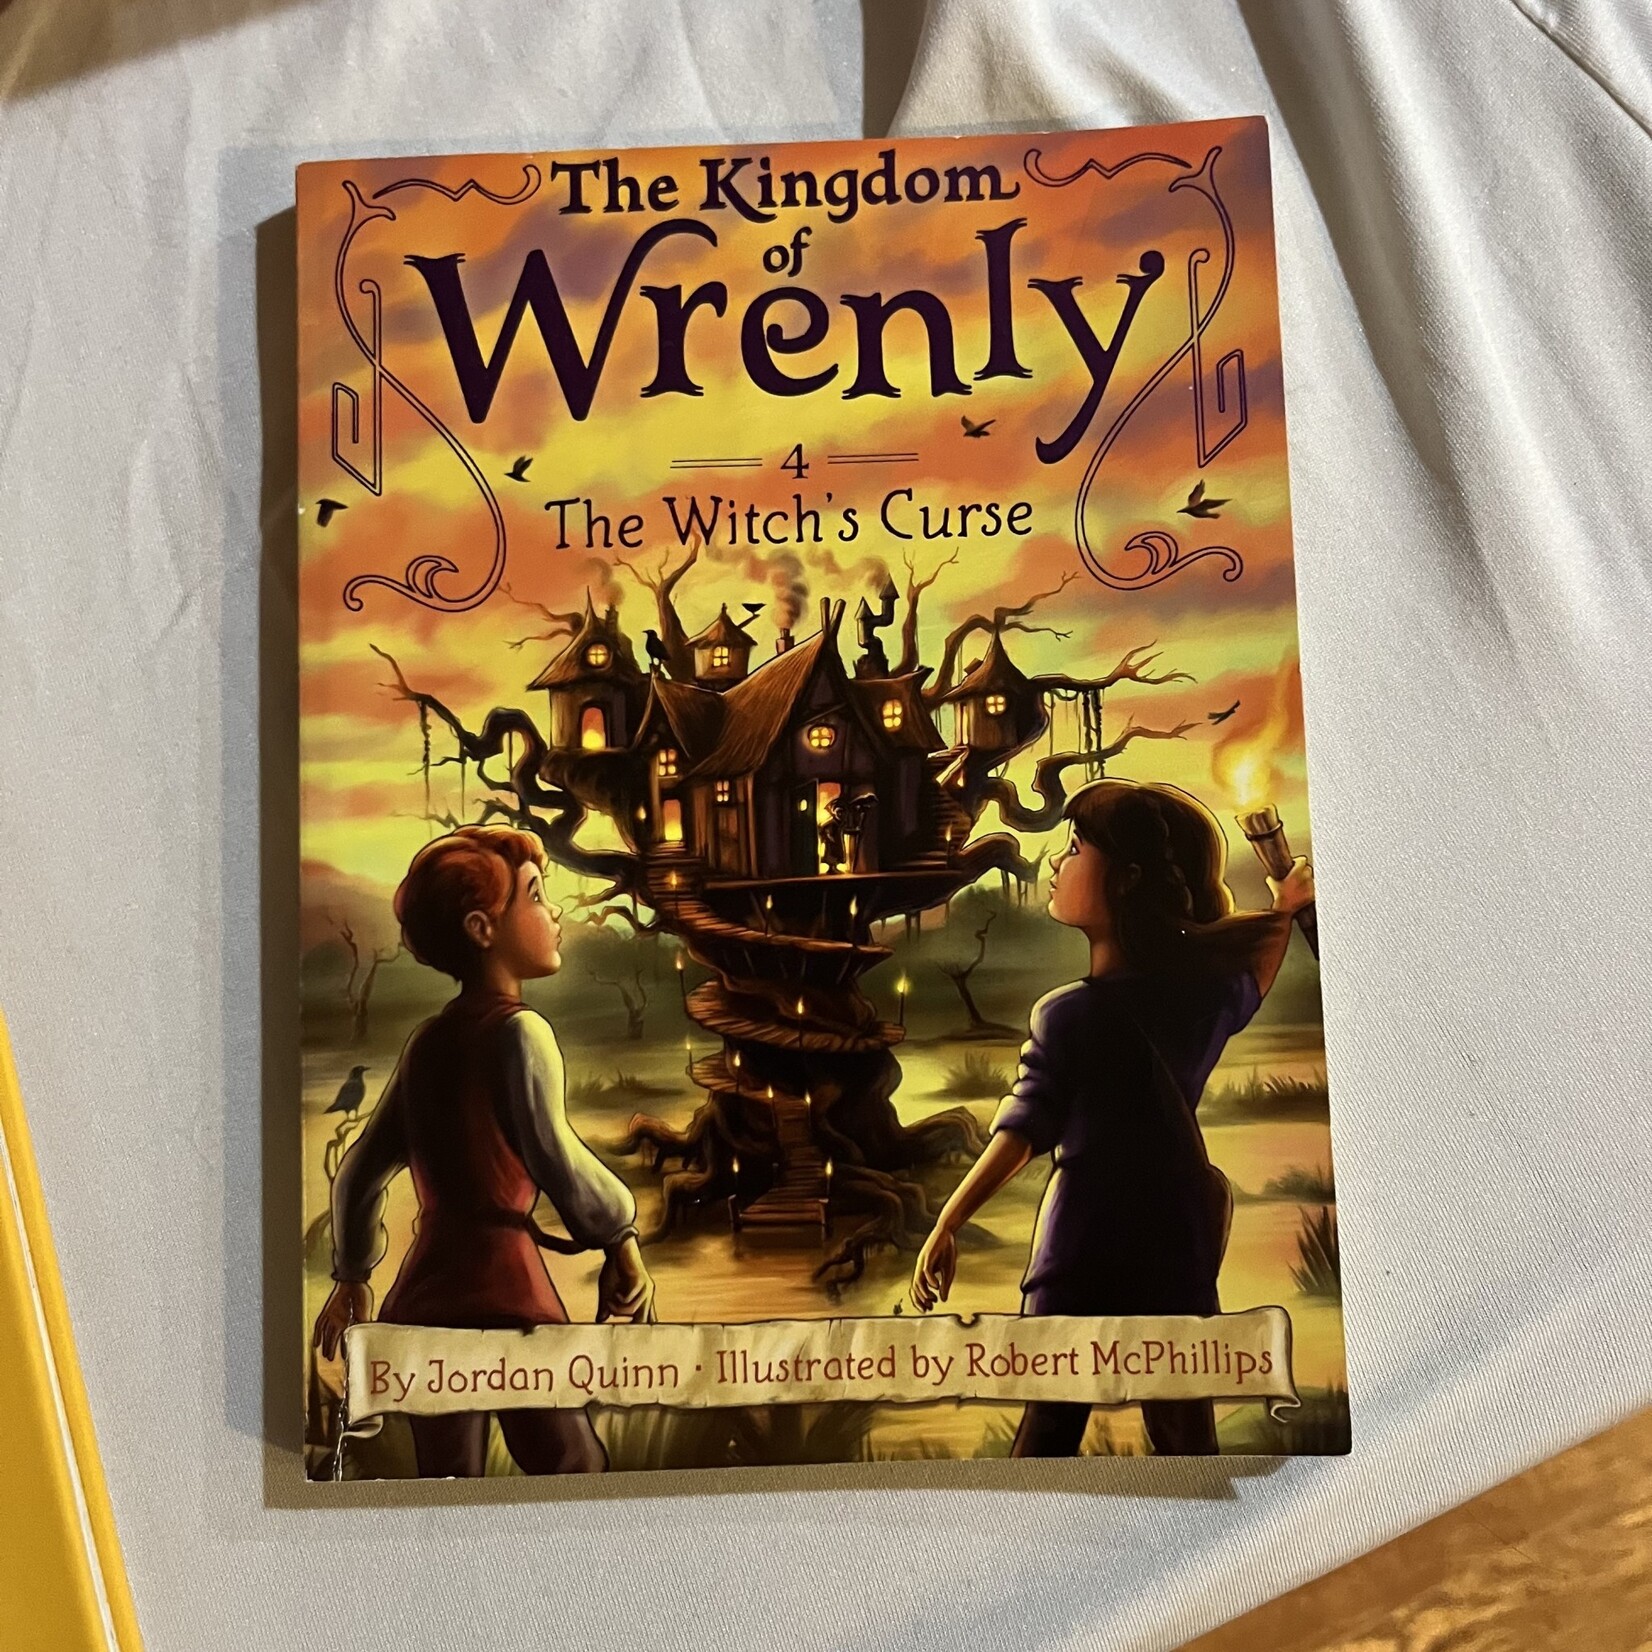 The Kingdom of Wrenly - The Witches Curse #4